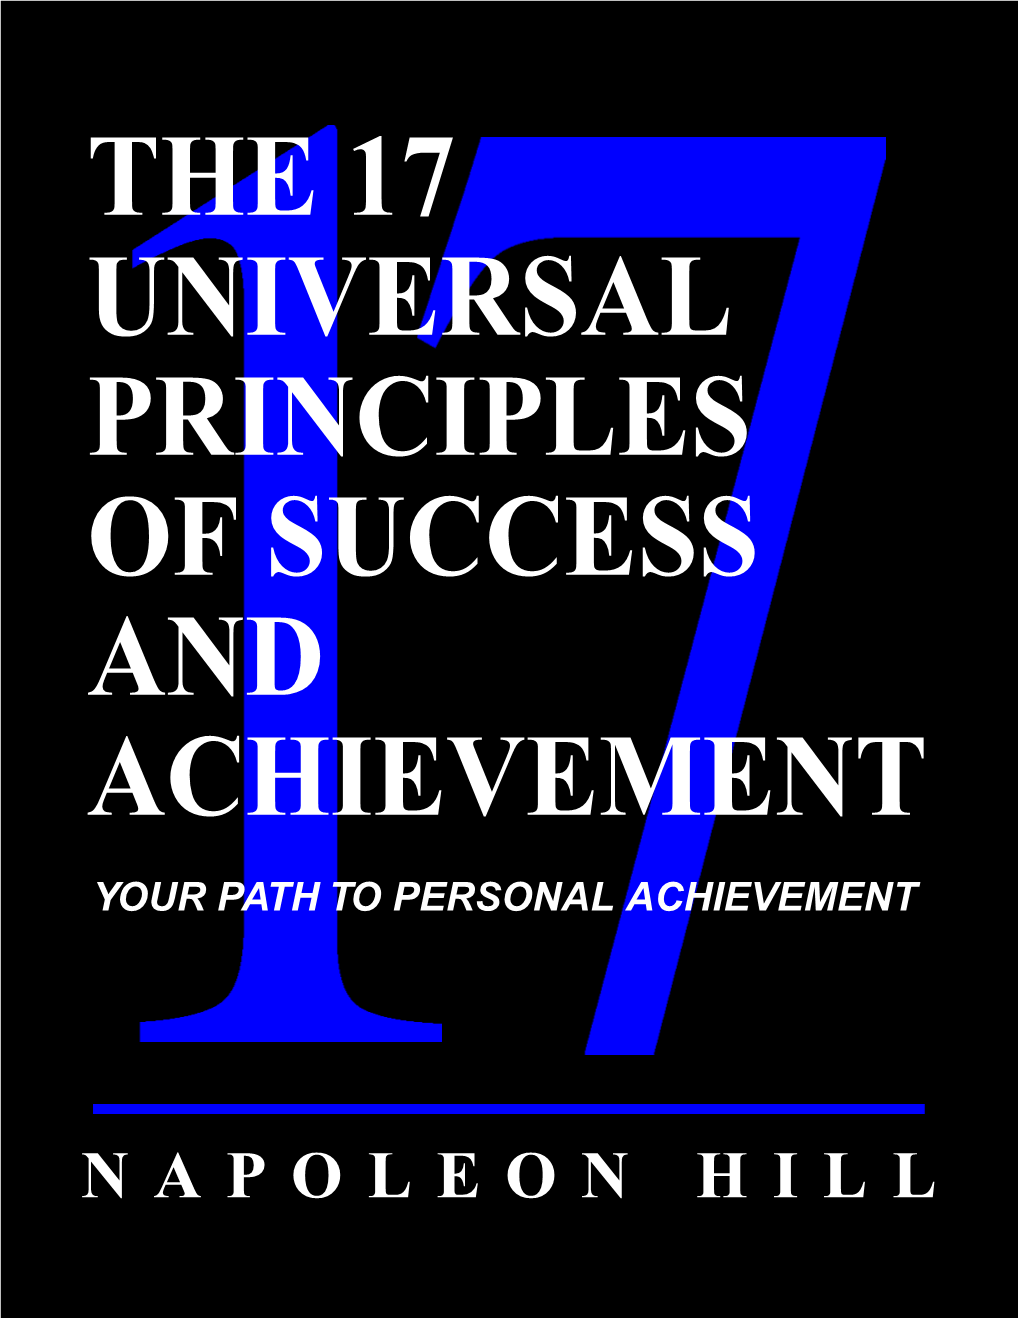 The 17 Universal Principles of Success and Achievement Your Path to Personal Achievement